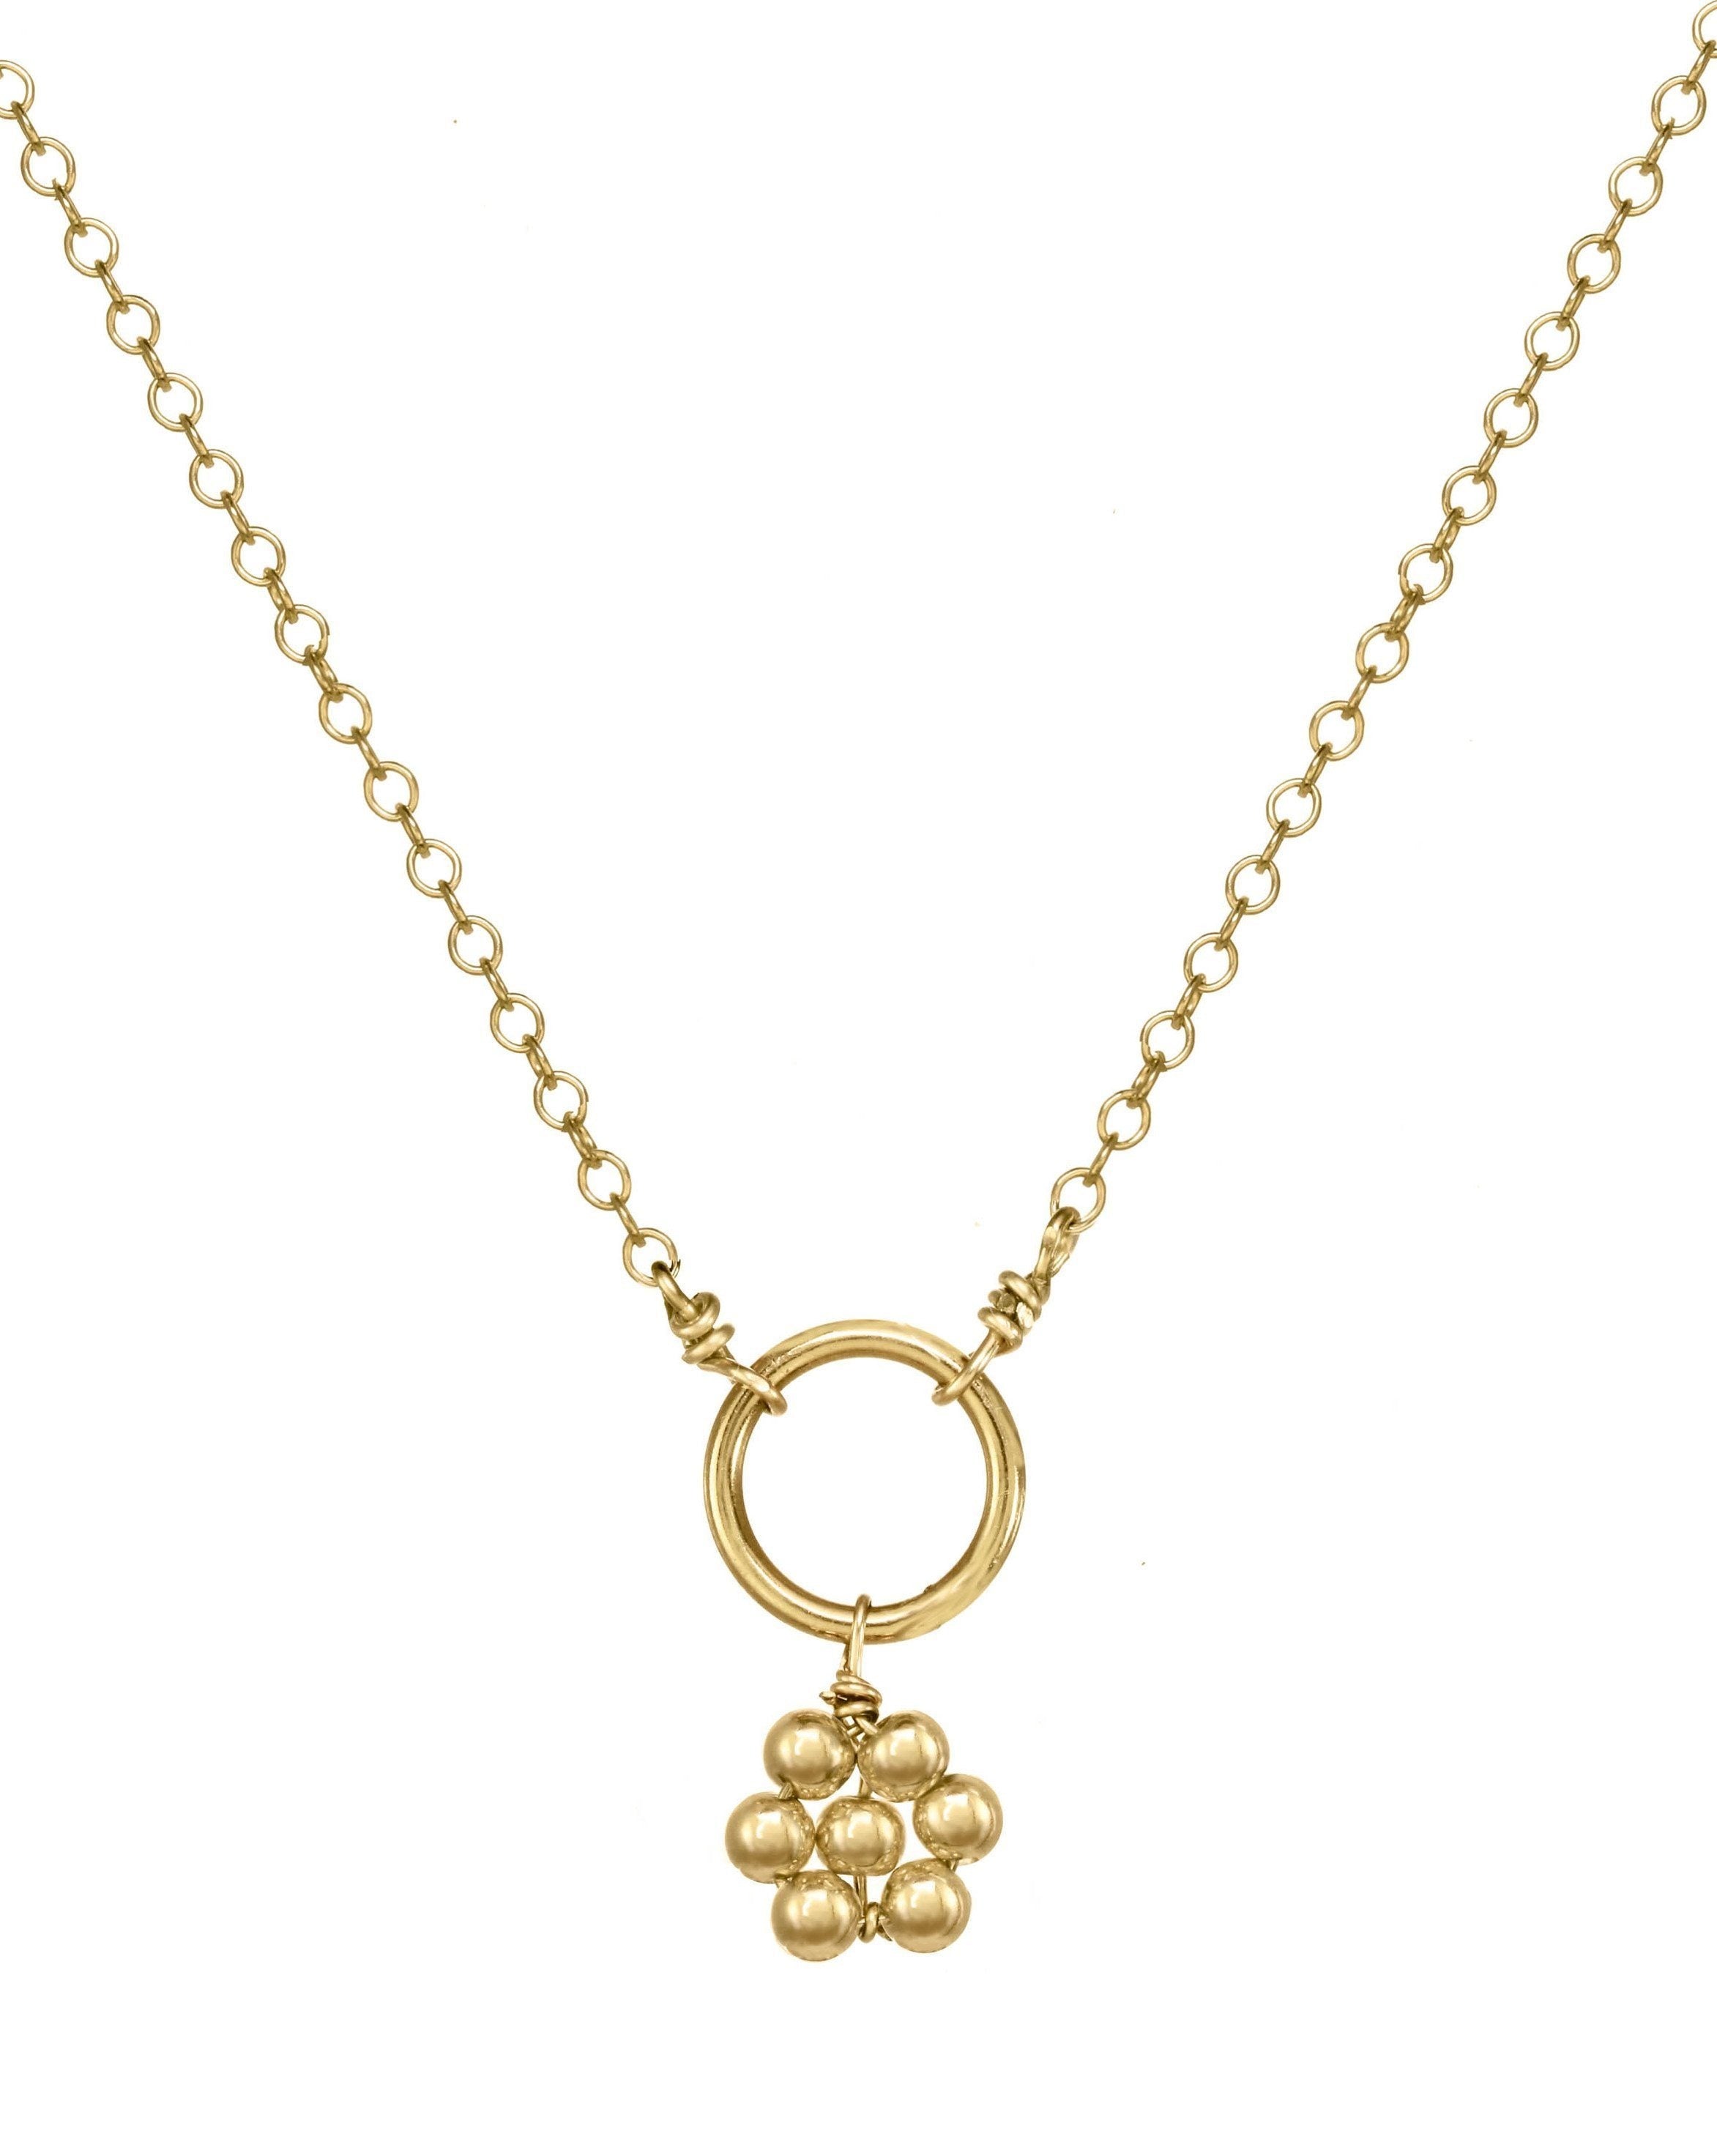 Luella Necklace by KOZAKH. A 16 to 18 inch adjustable length necklace, crafted in 14K Gold Filled, featuring a handmade beaded daisy charm.